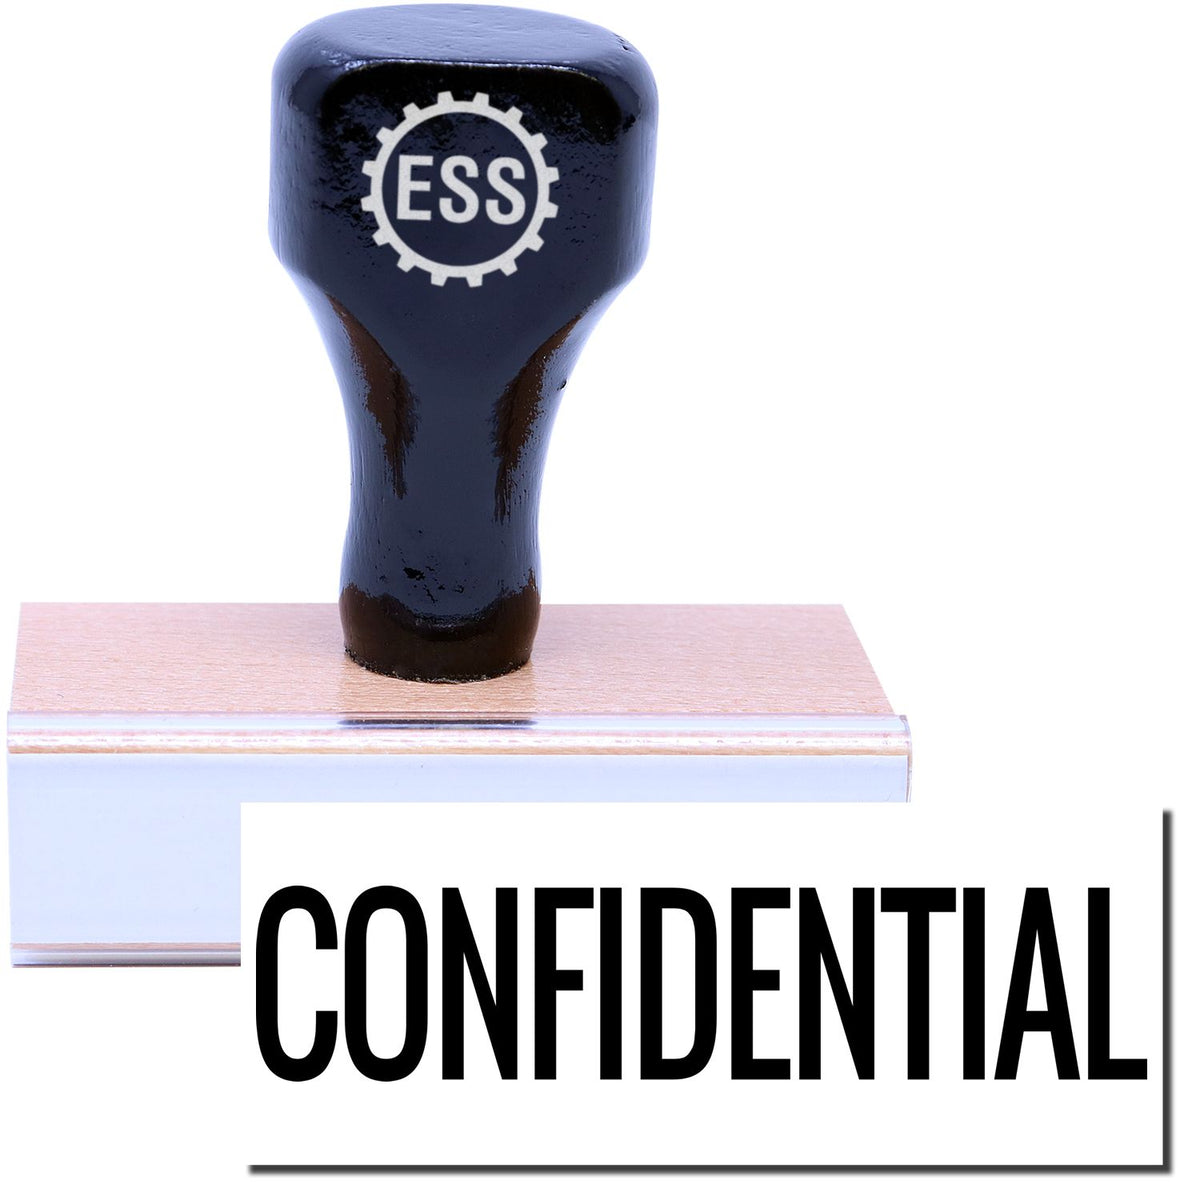 A stock office rubber stamp with a stamped image showing how the text &quot;CONFIDENTIAL&quot; in a narrow font is displayed after stamping.